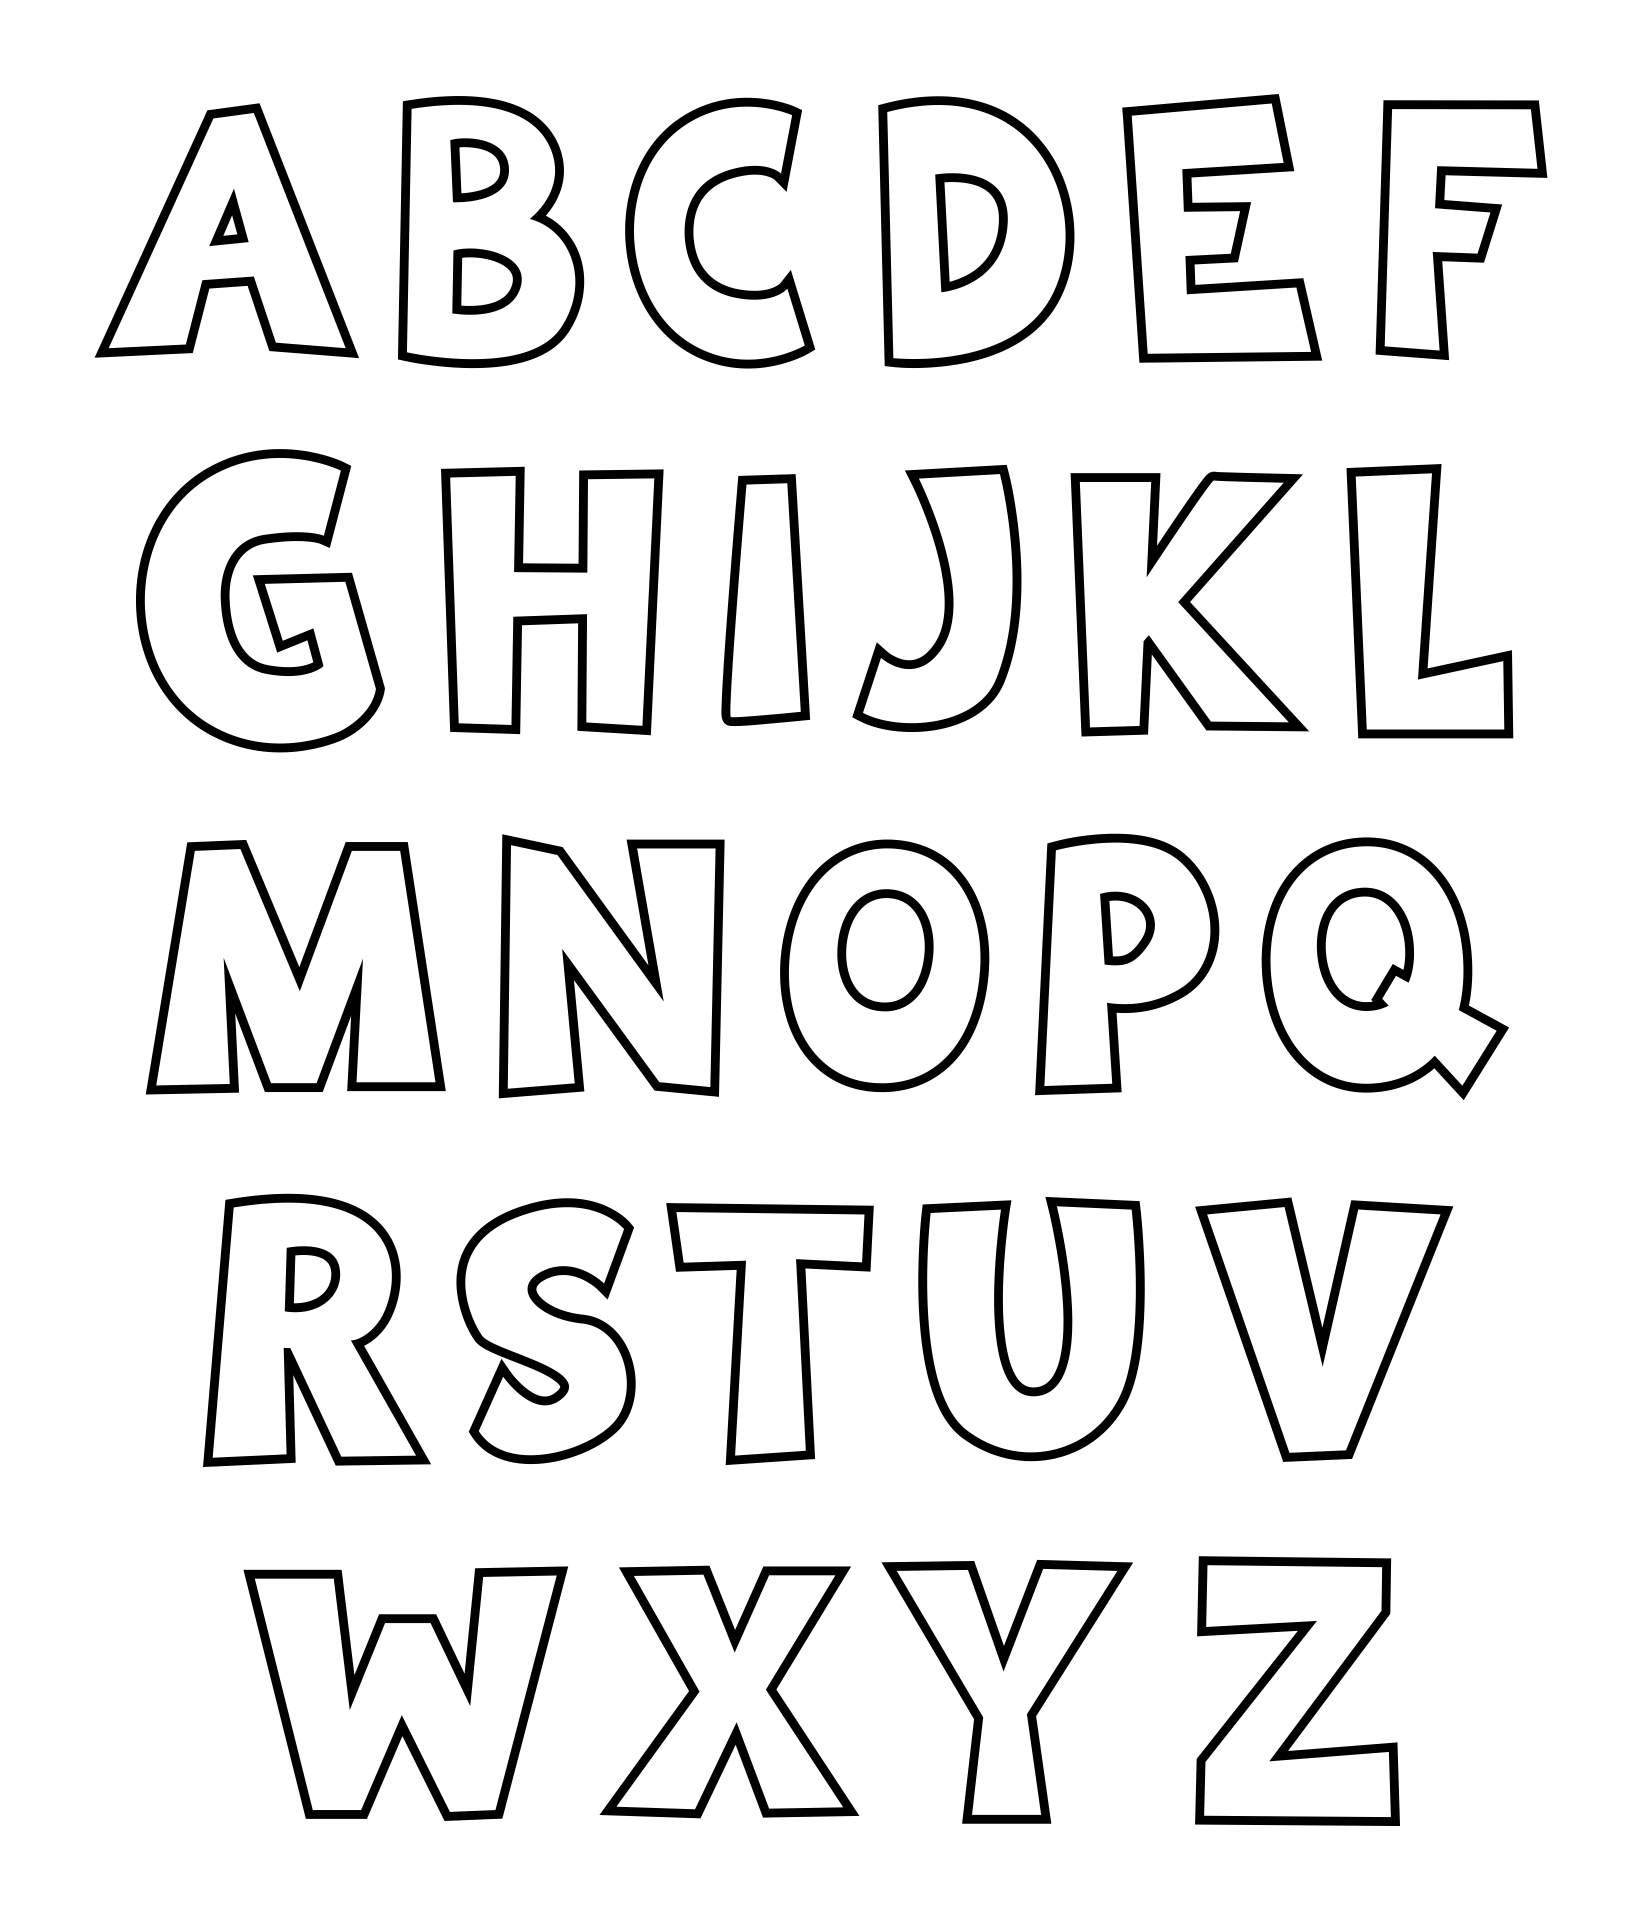 5 Best Images of Printable Alphabet Outlines - Printable Alphabet ...